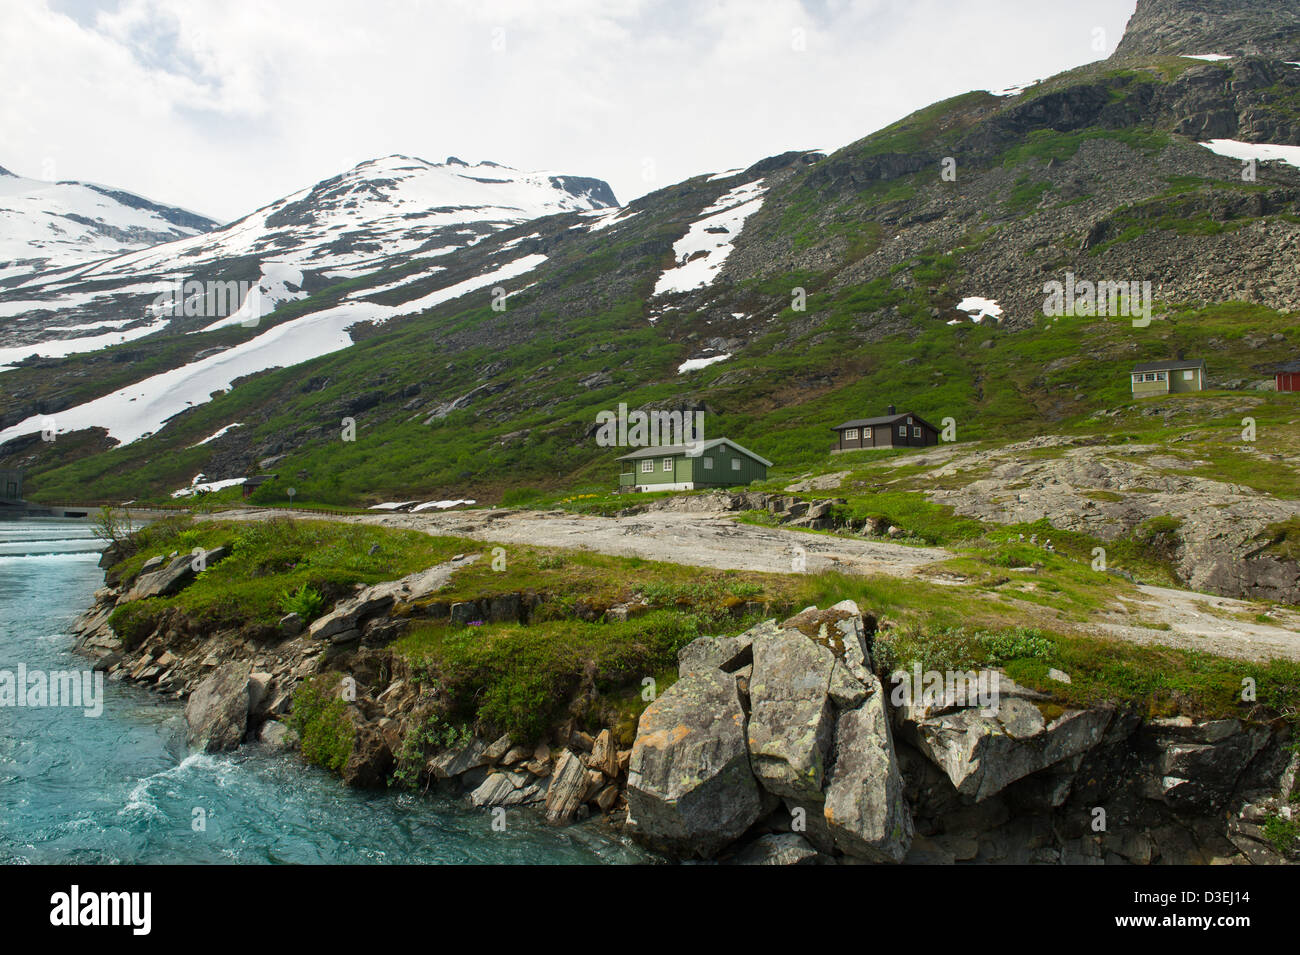 Small houses and nature landscape mountains of Norway Stock Photo